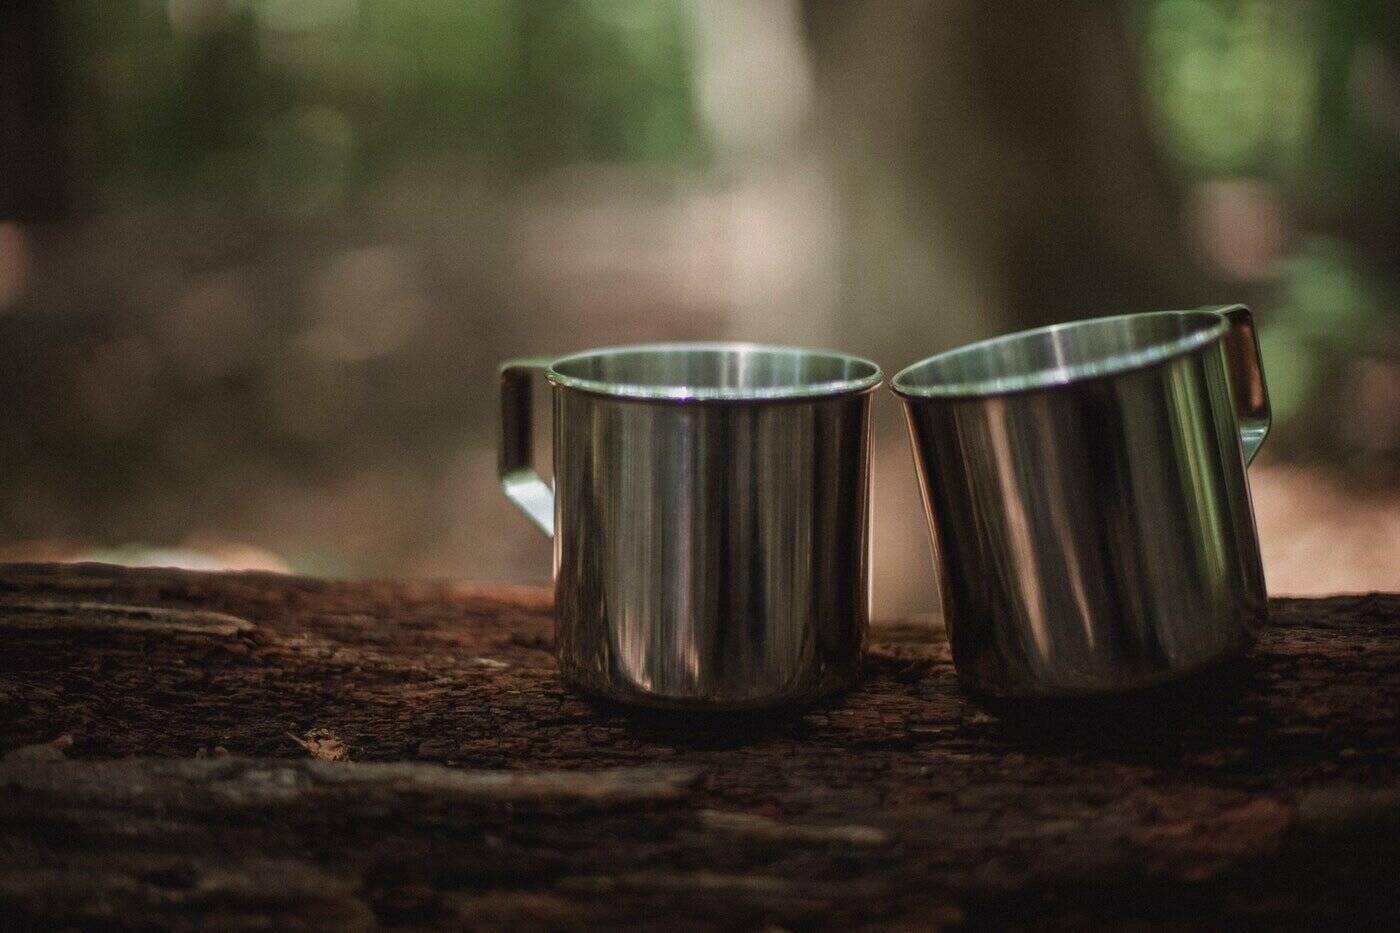 stainless steel cups on wooden table with forest background - tips for choosing eco-friendly cookware